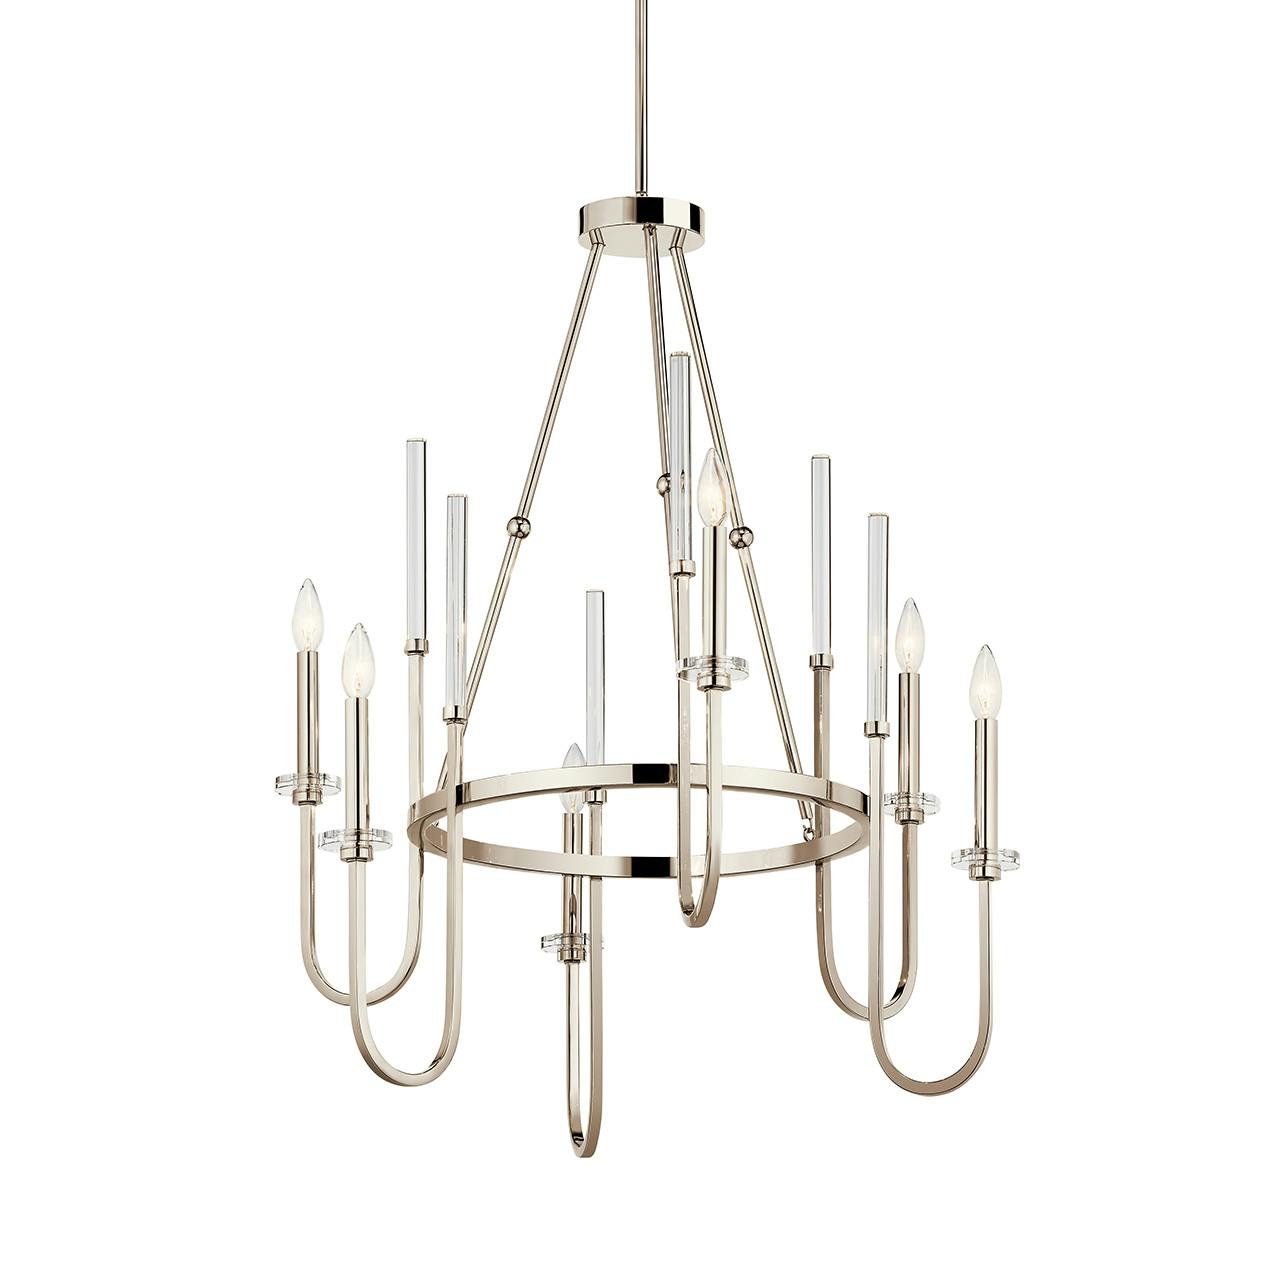 Kadas 36.25" 6 Light Chandelier Nickel without the canopy on a white background